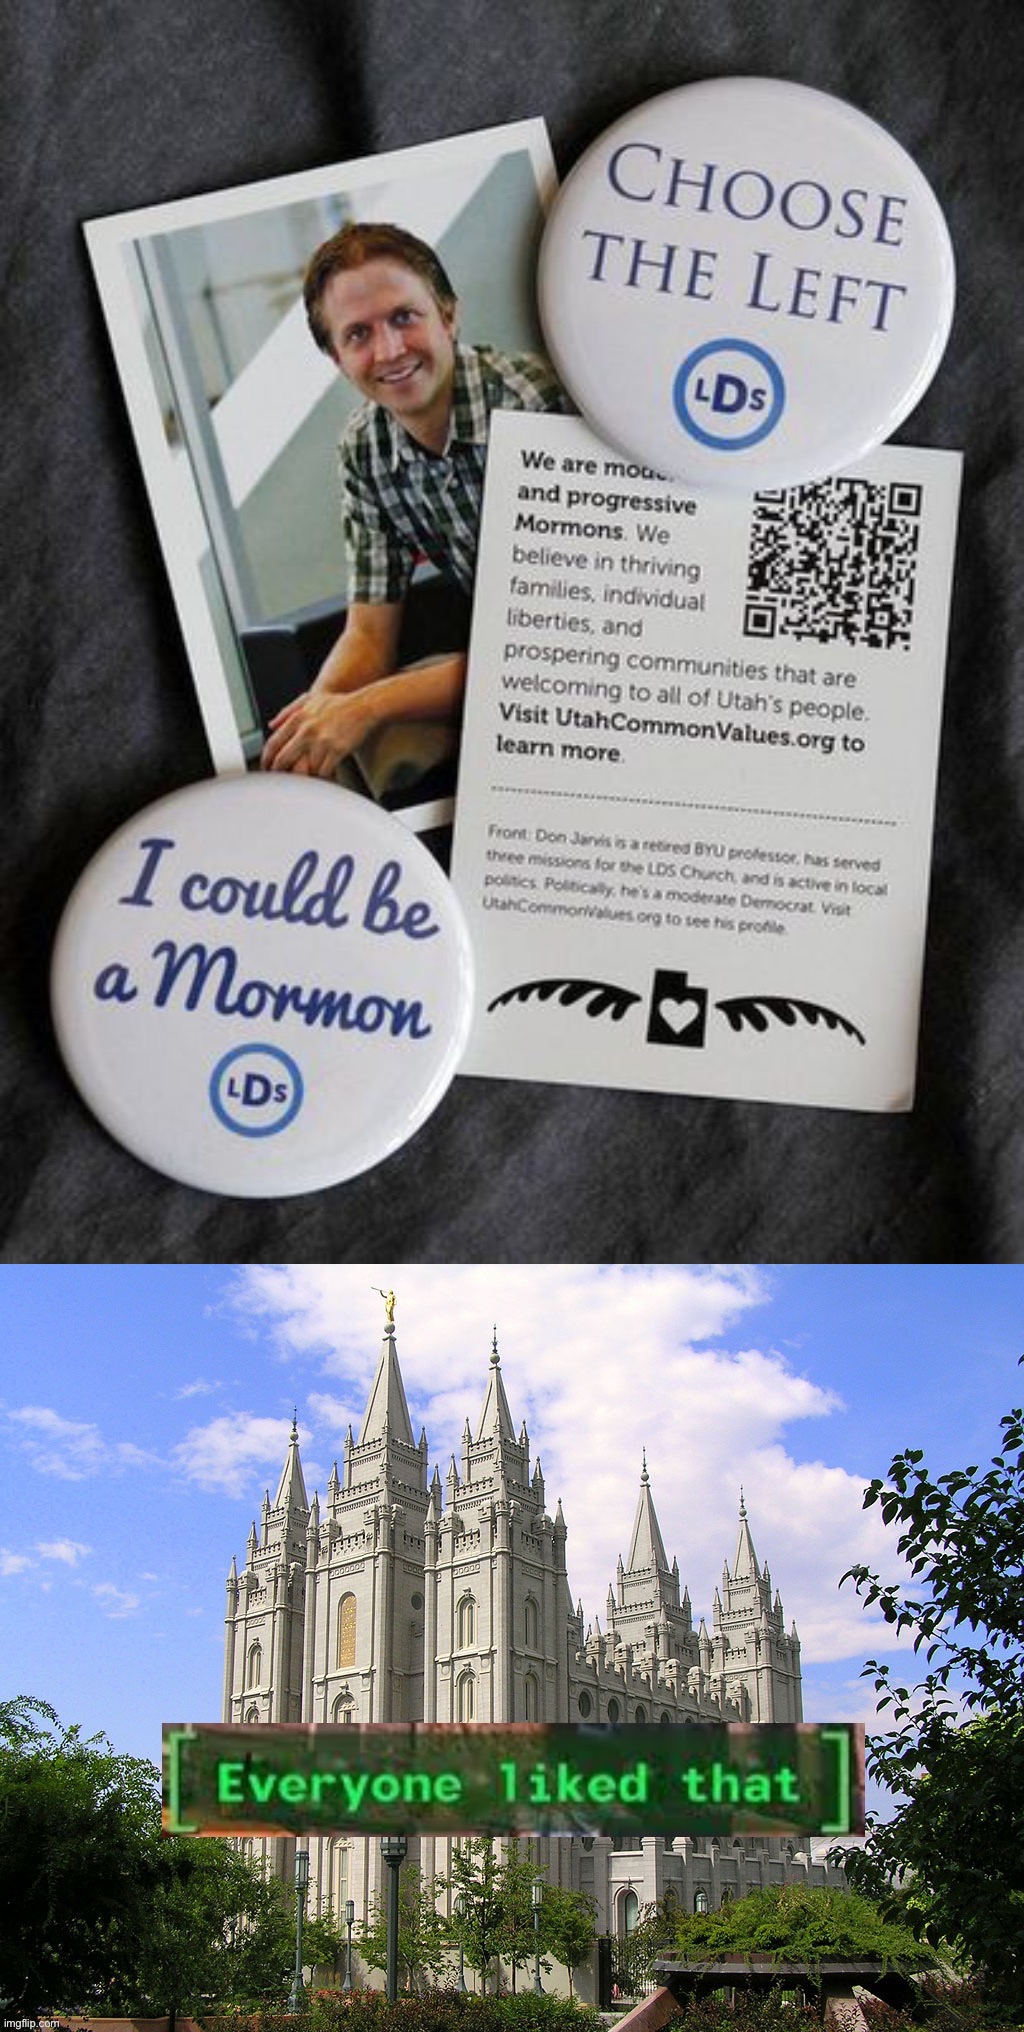 I could be a Mormon. You could be a Mormon. Anyone could be a Mormon when you CHOOSE THE LEFT. | made w/ Imgflip meme maker